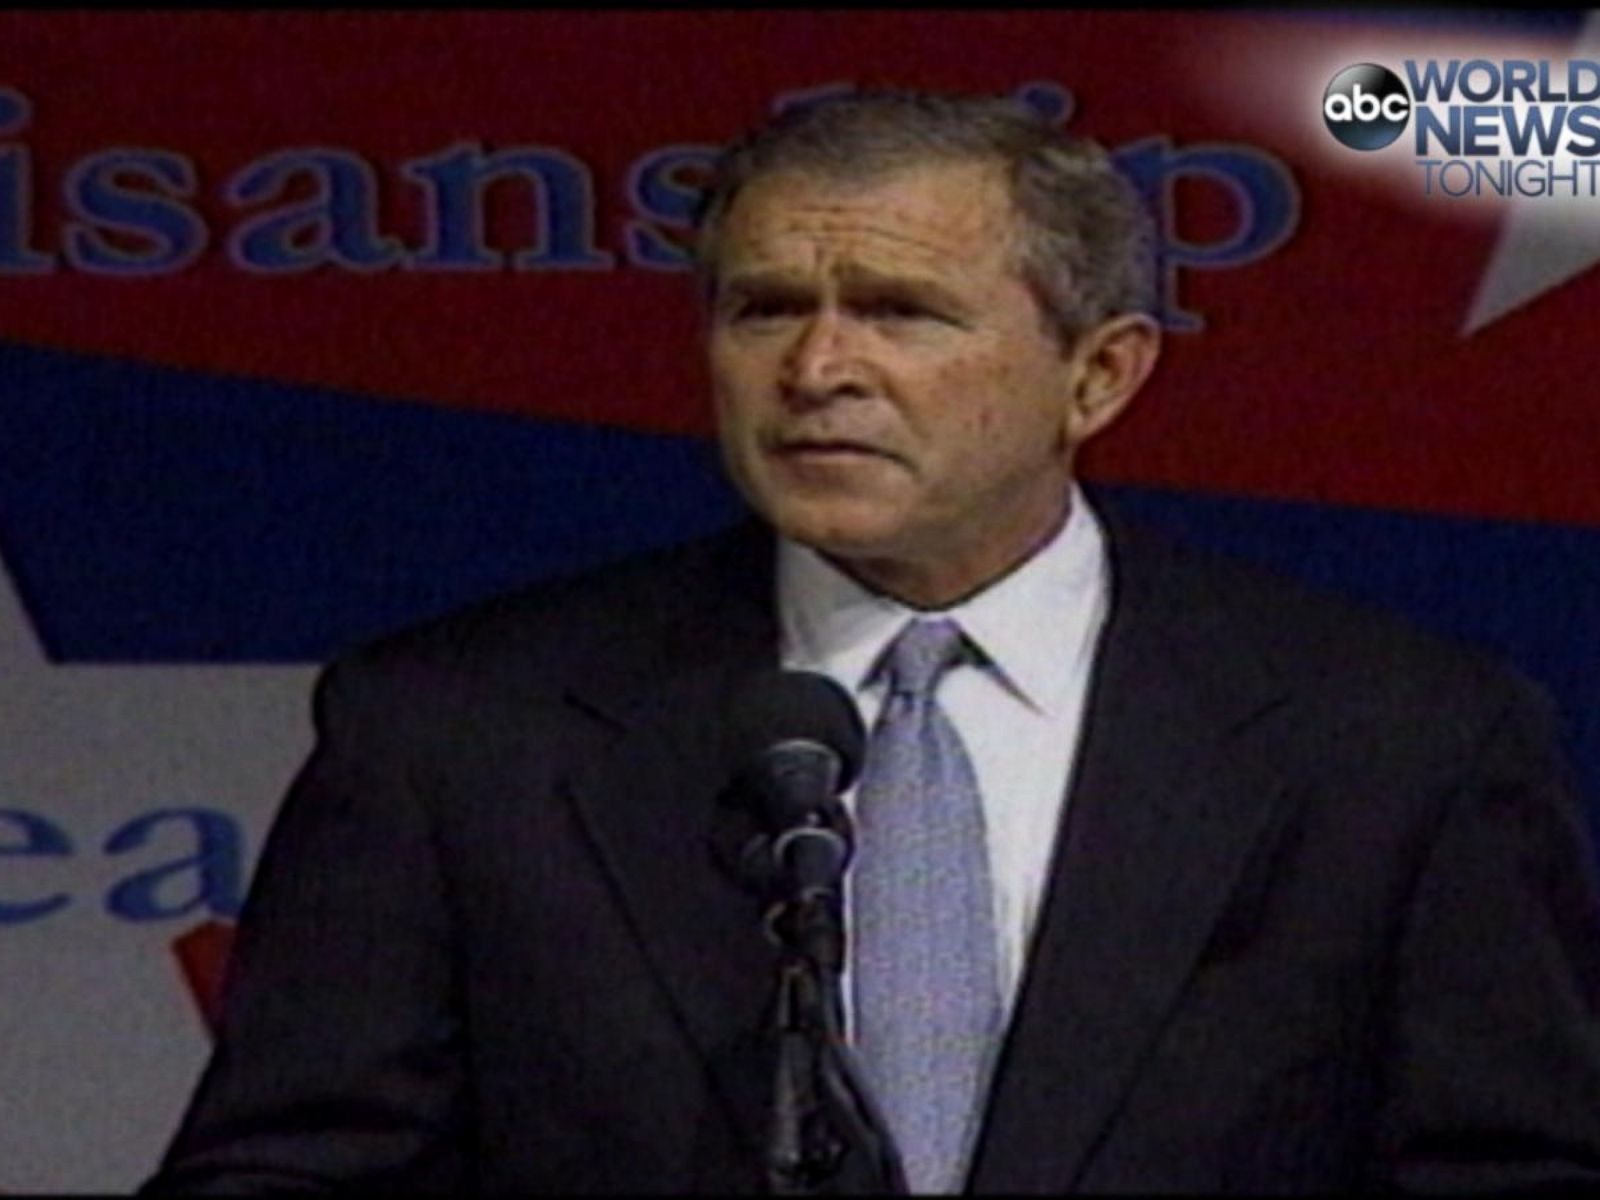 2000 - 13 Days: Bush Hints Colin Powell May Be Cabinet Choice